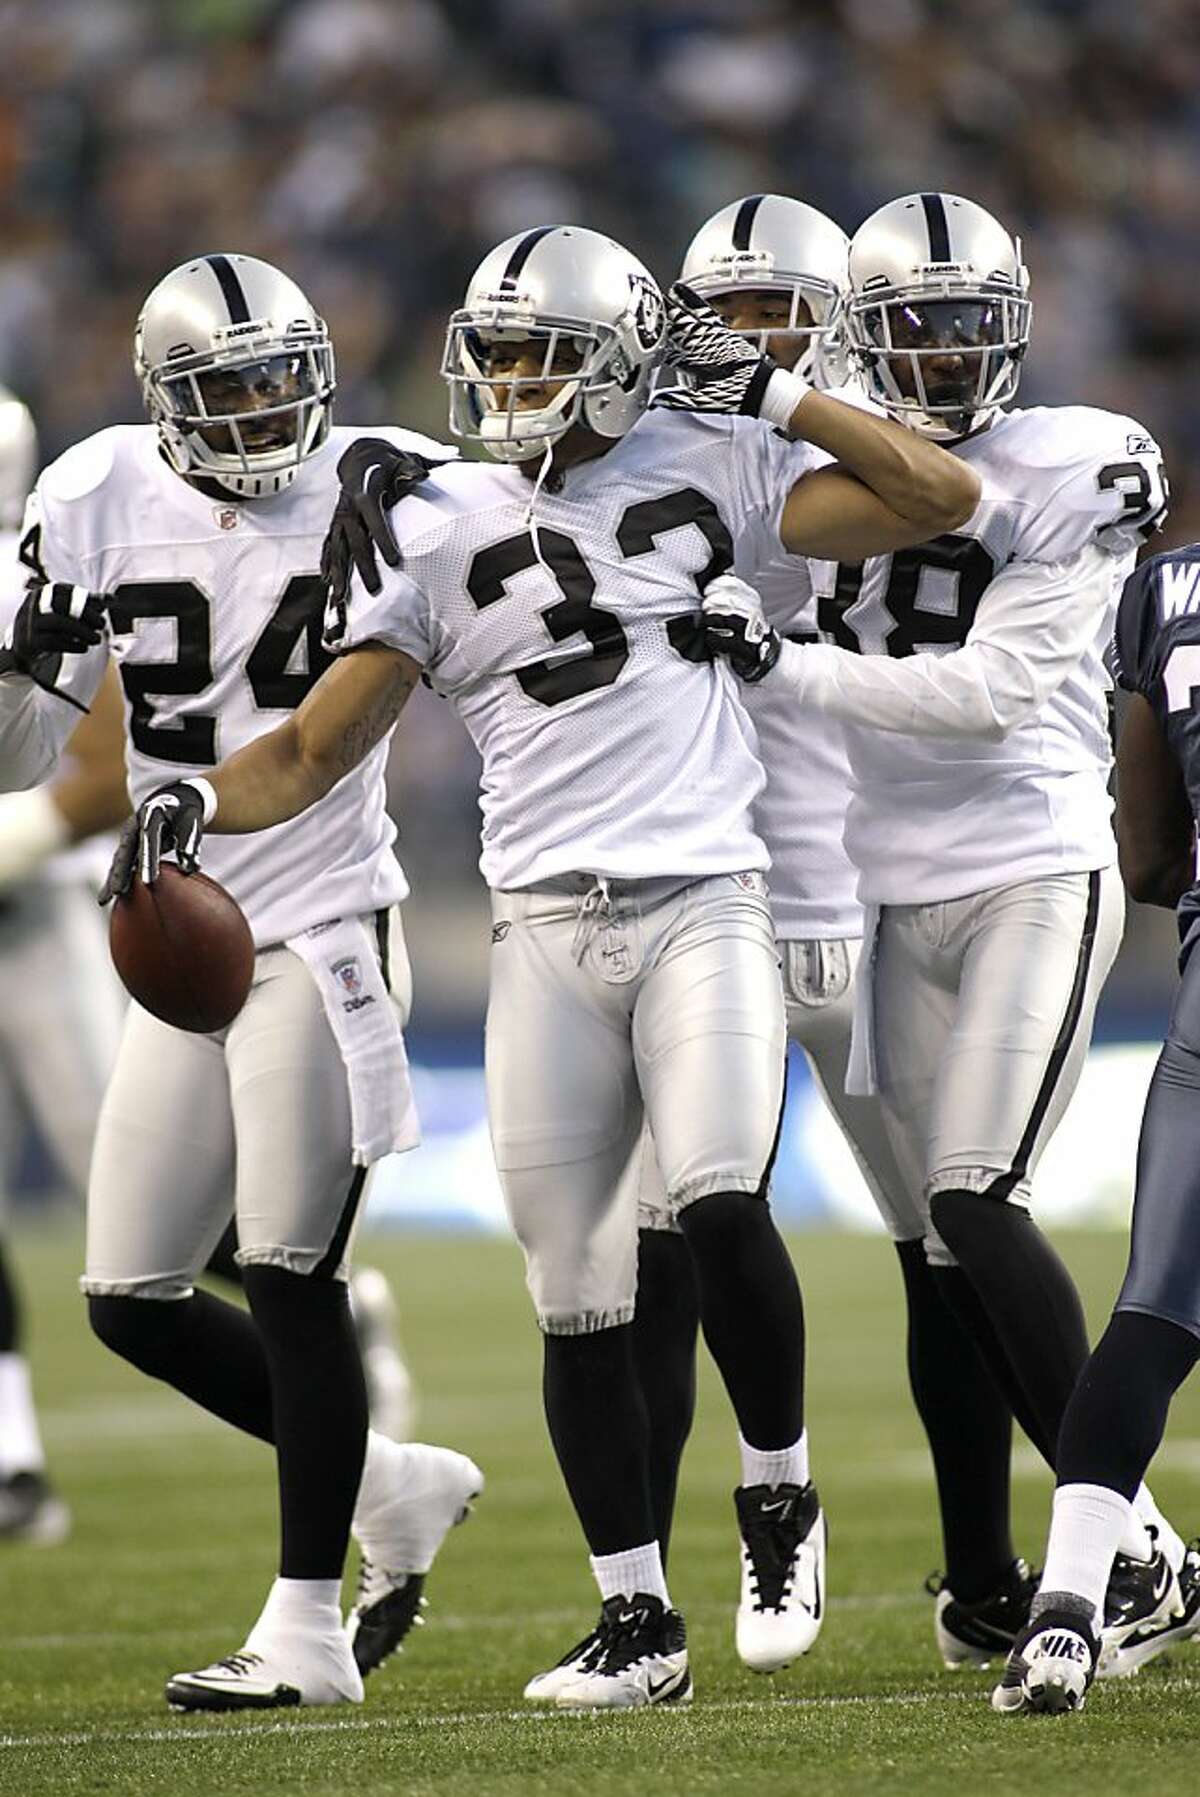 Oakland Raiders Tyvon Branch (33) in congratulated by his team after catching an interception against the Seattle Seahawks in the first half of a preseason NFL football game, Friday, Sept. 2, 2011, in Seattle. (AP Photo/Ted S. Warren)